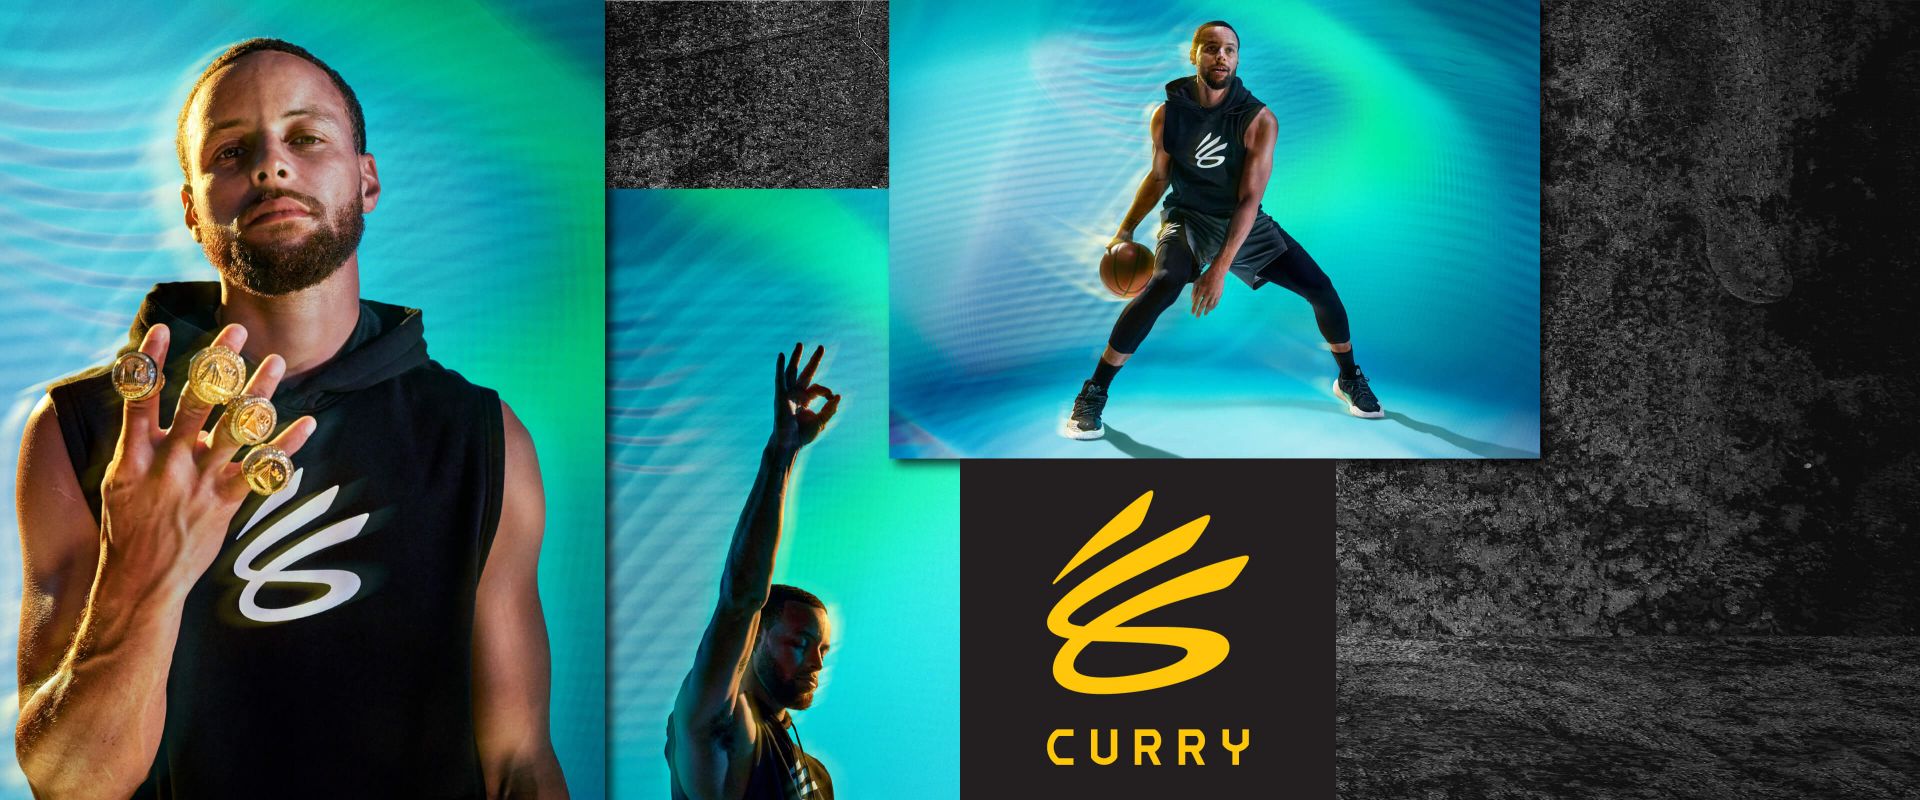 "CURRY"